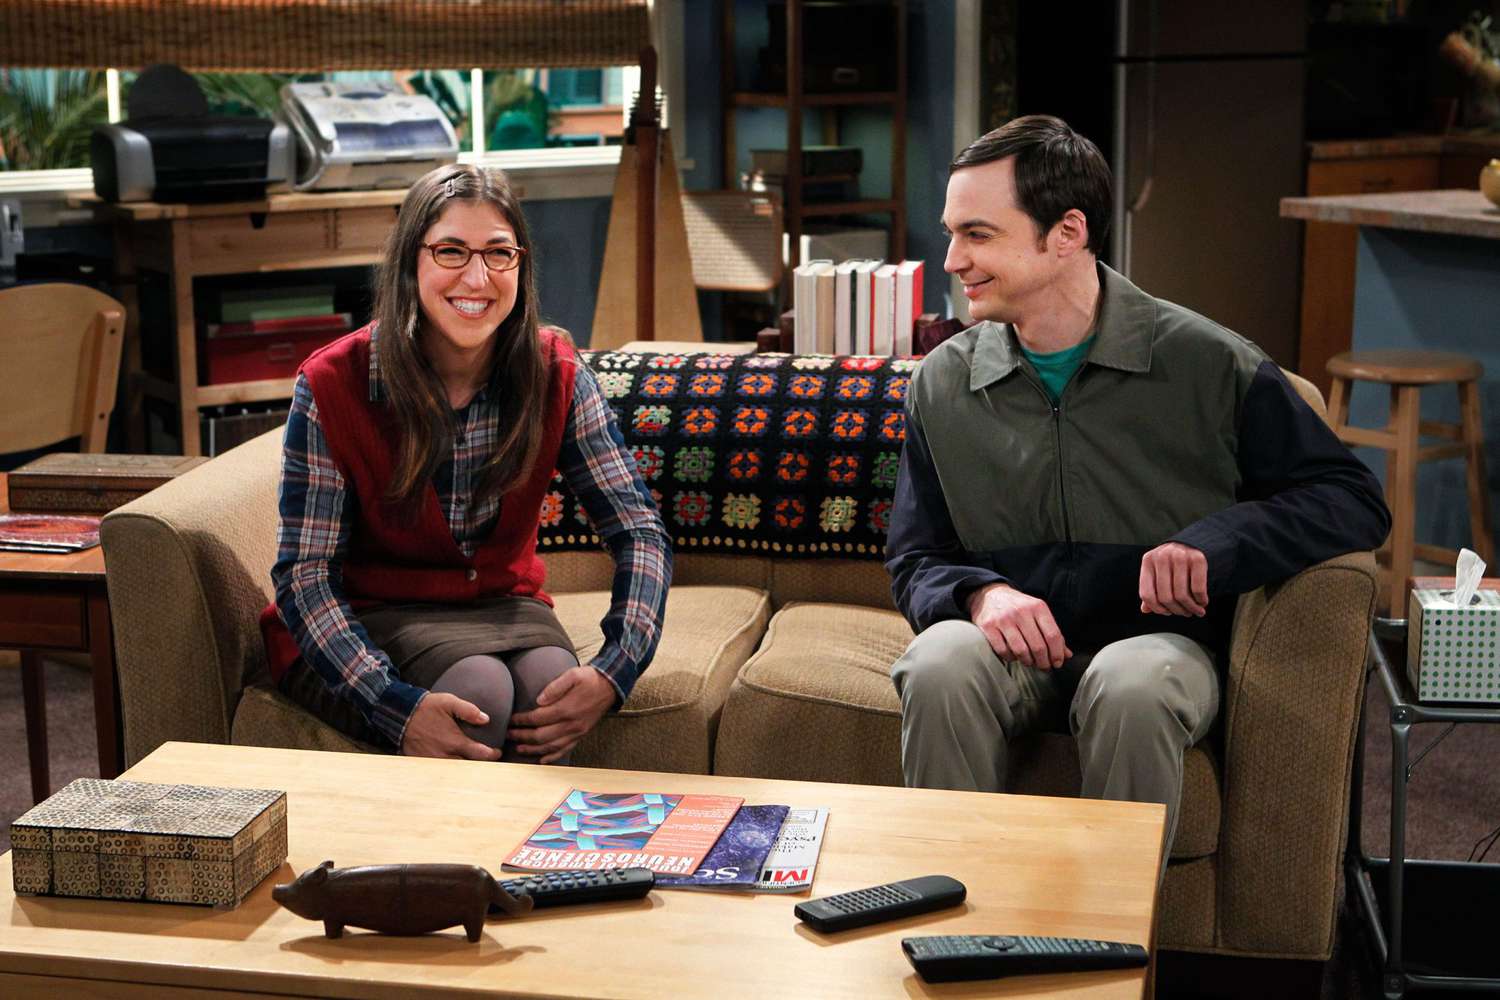 &ldquo;The Rhinitis Revelation&rdquo; -- Coverage of CBS' THE BIG BANG THEORY scheduled to air on the CBS Television Network. Photo: SONJA FLEMMING/CBS &copy;2011 CBS BROADCASTING INC. All Rights Reserved.